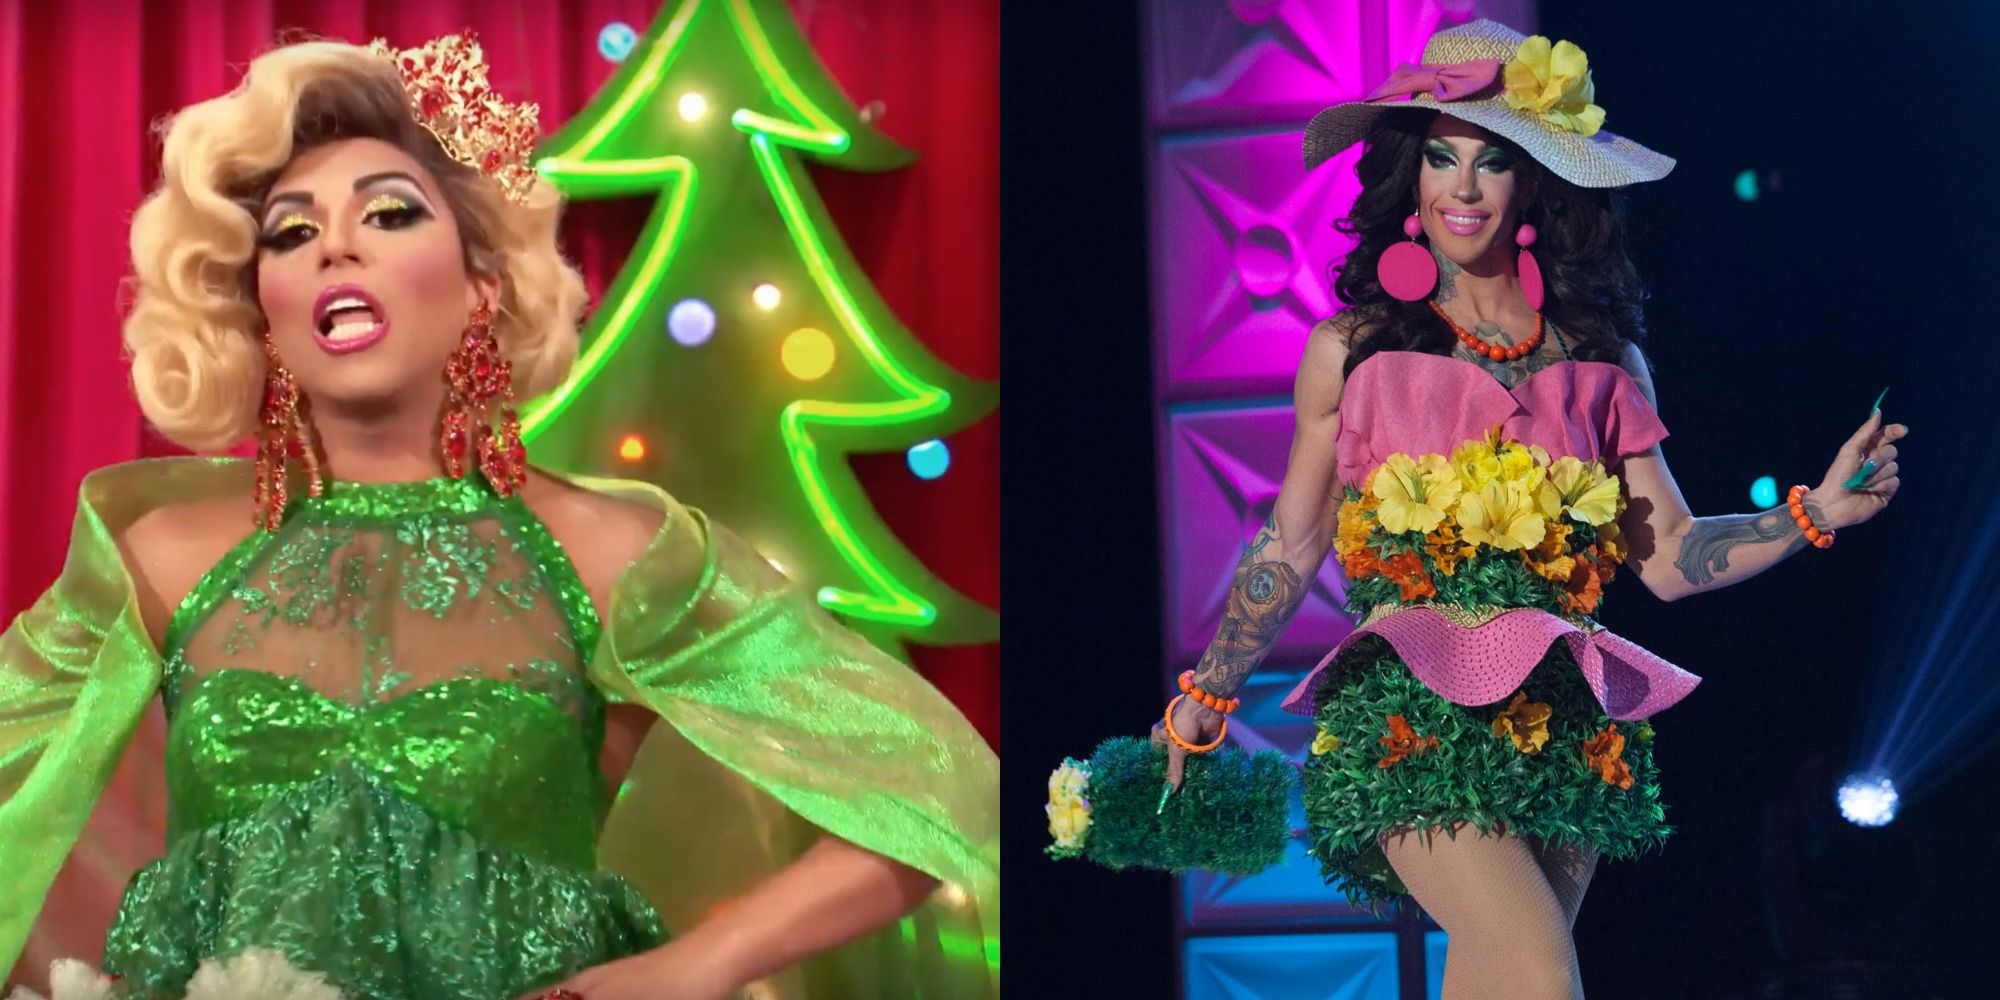 10 Things RuPaul’s Drag Race Used To Do That It Should Bring Back